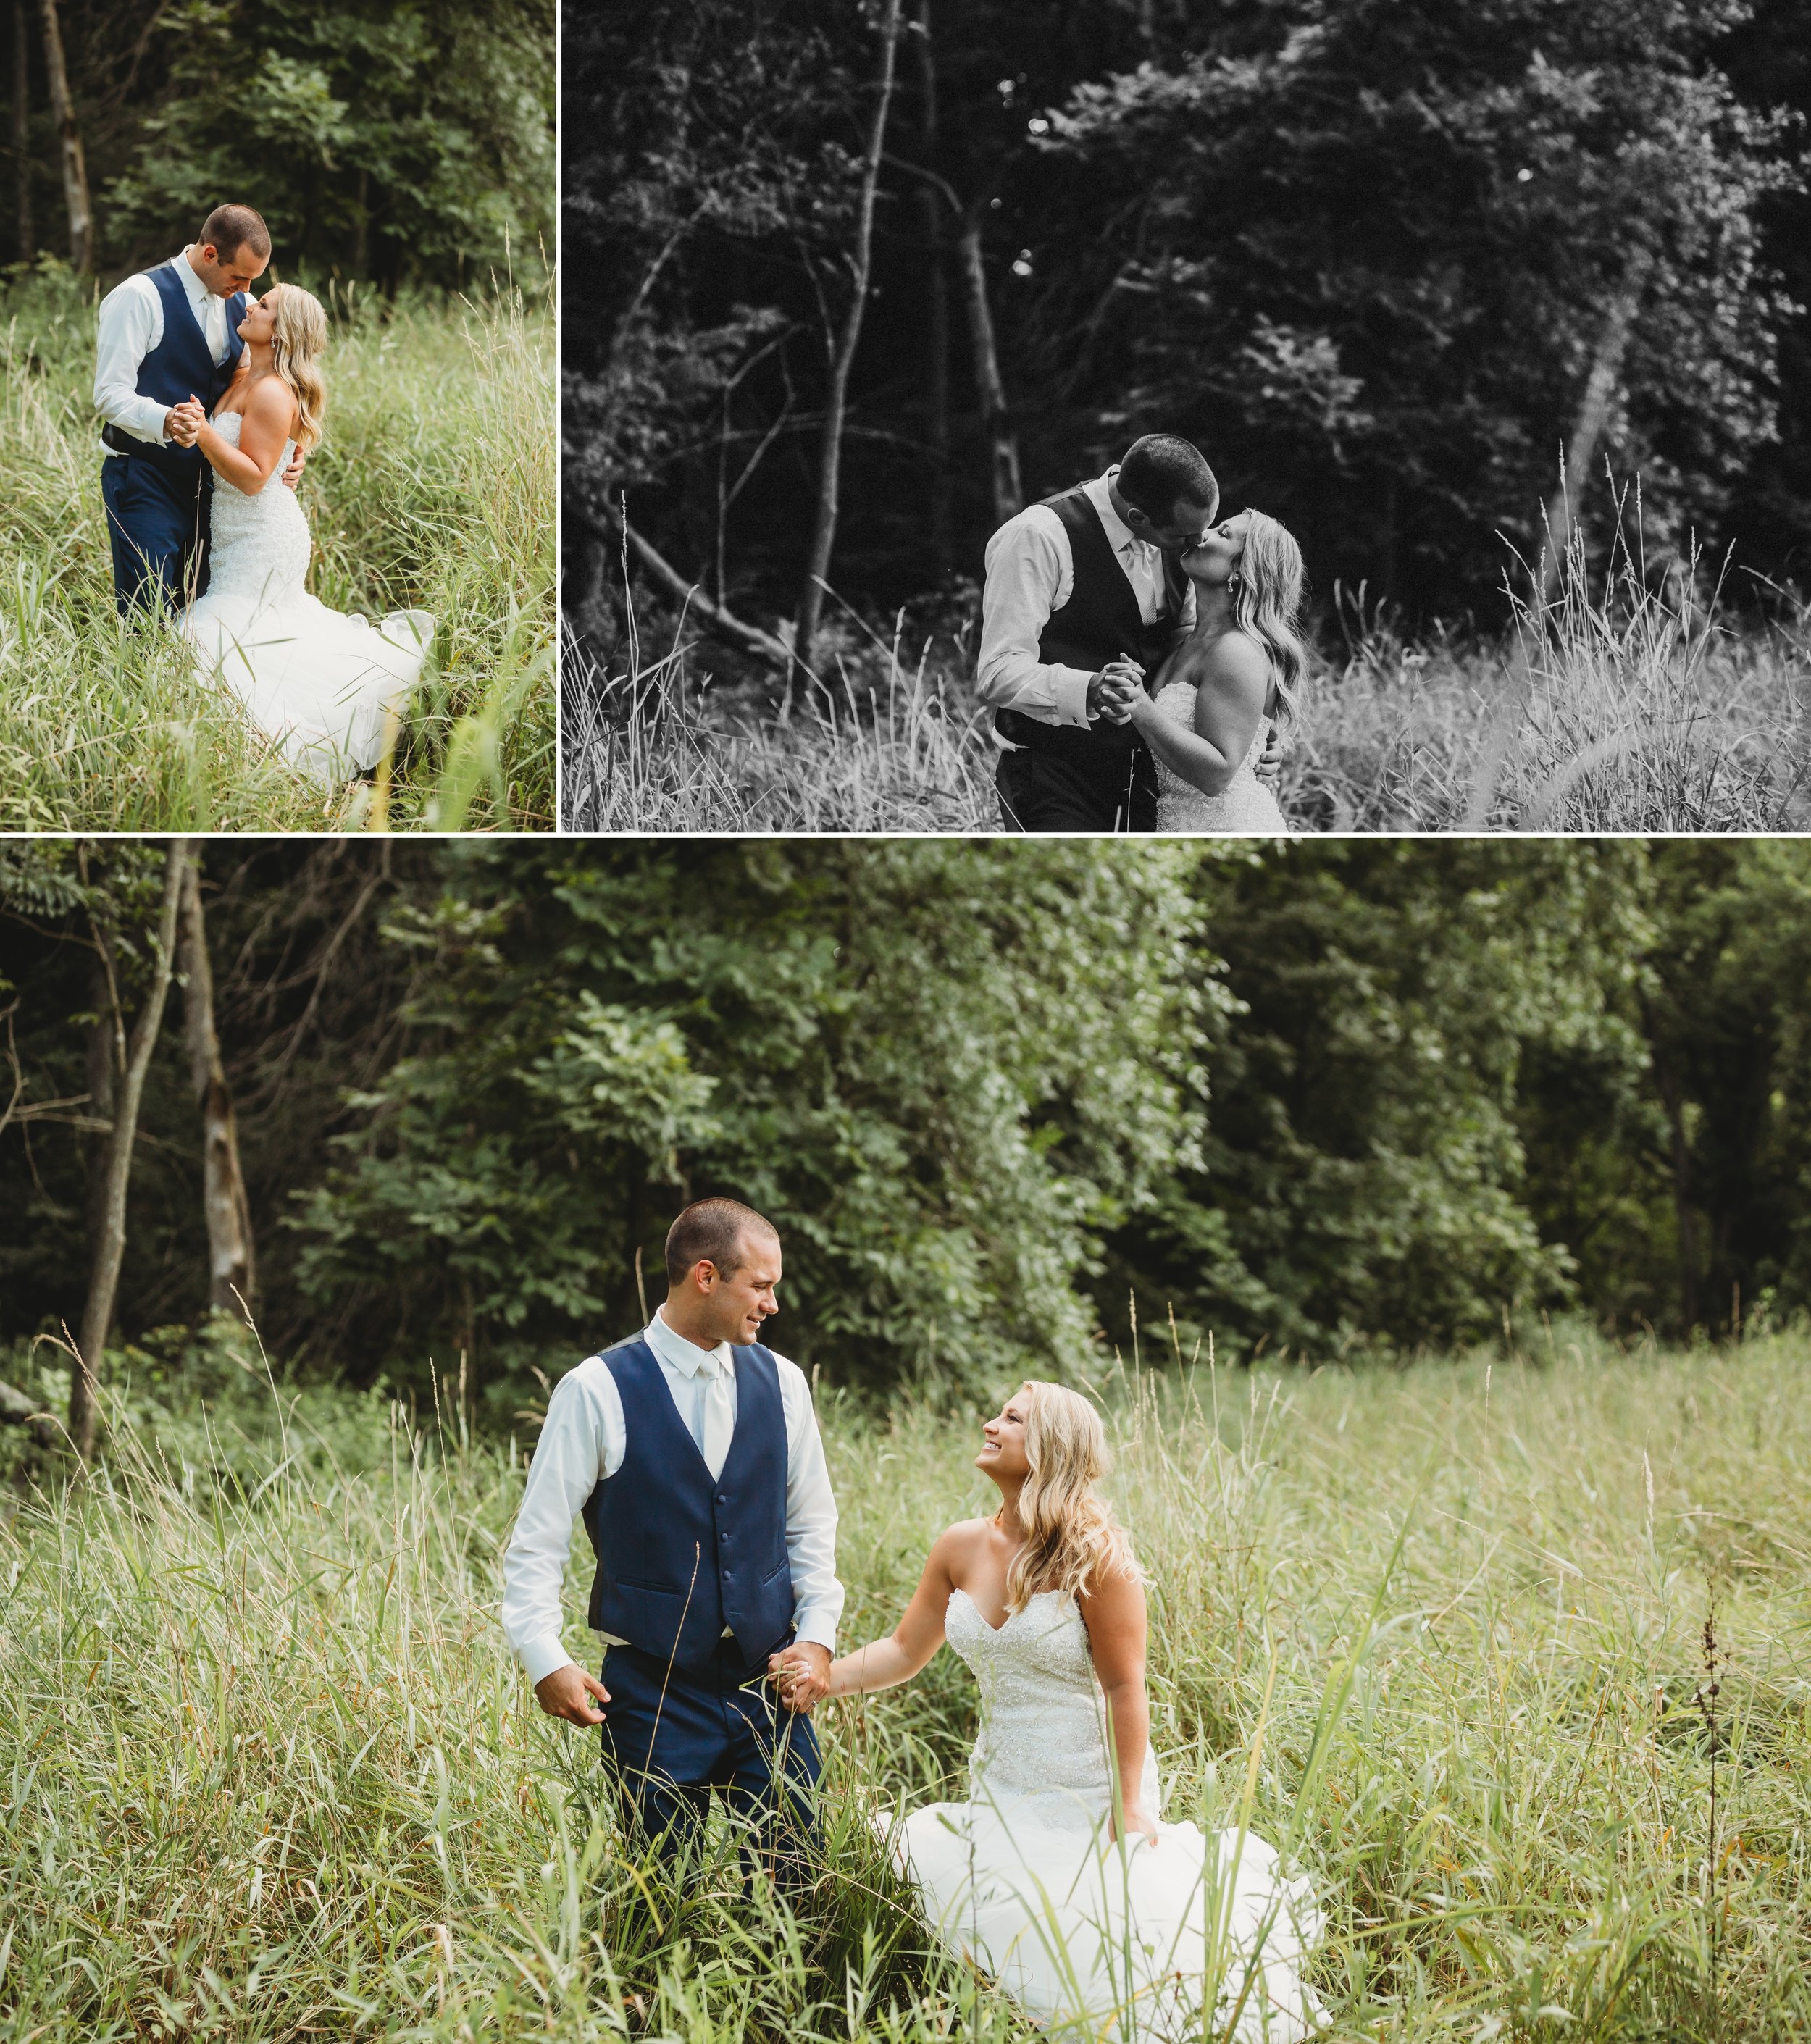 Mr & Mrs Wright — Hillary Frost Photography